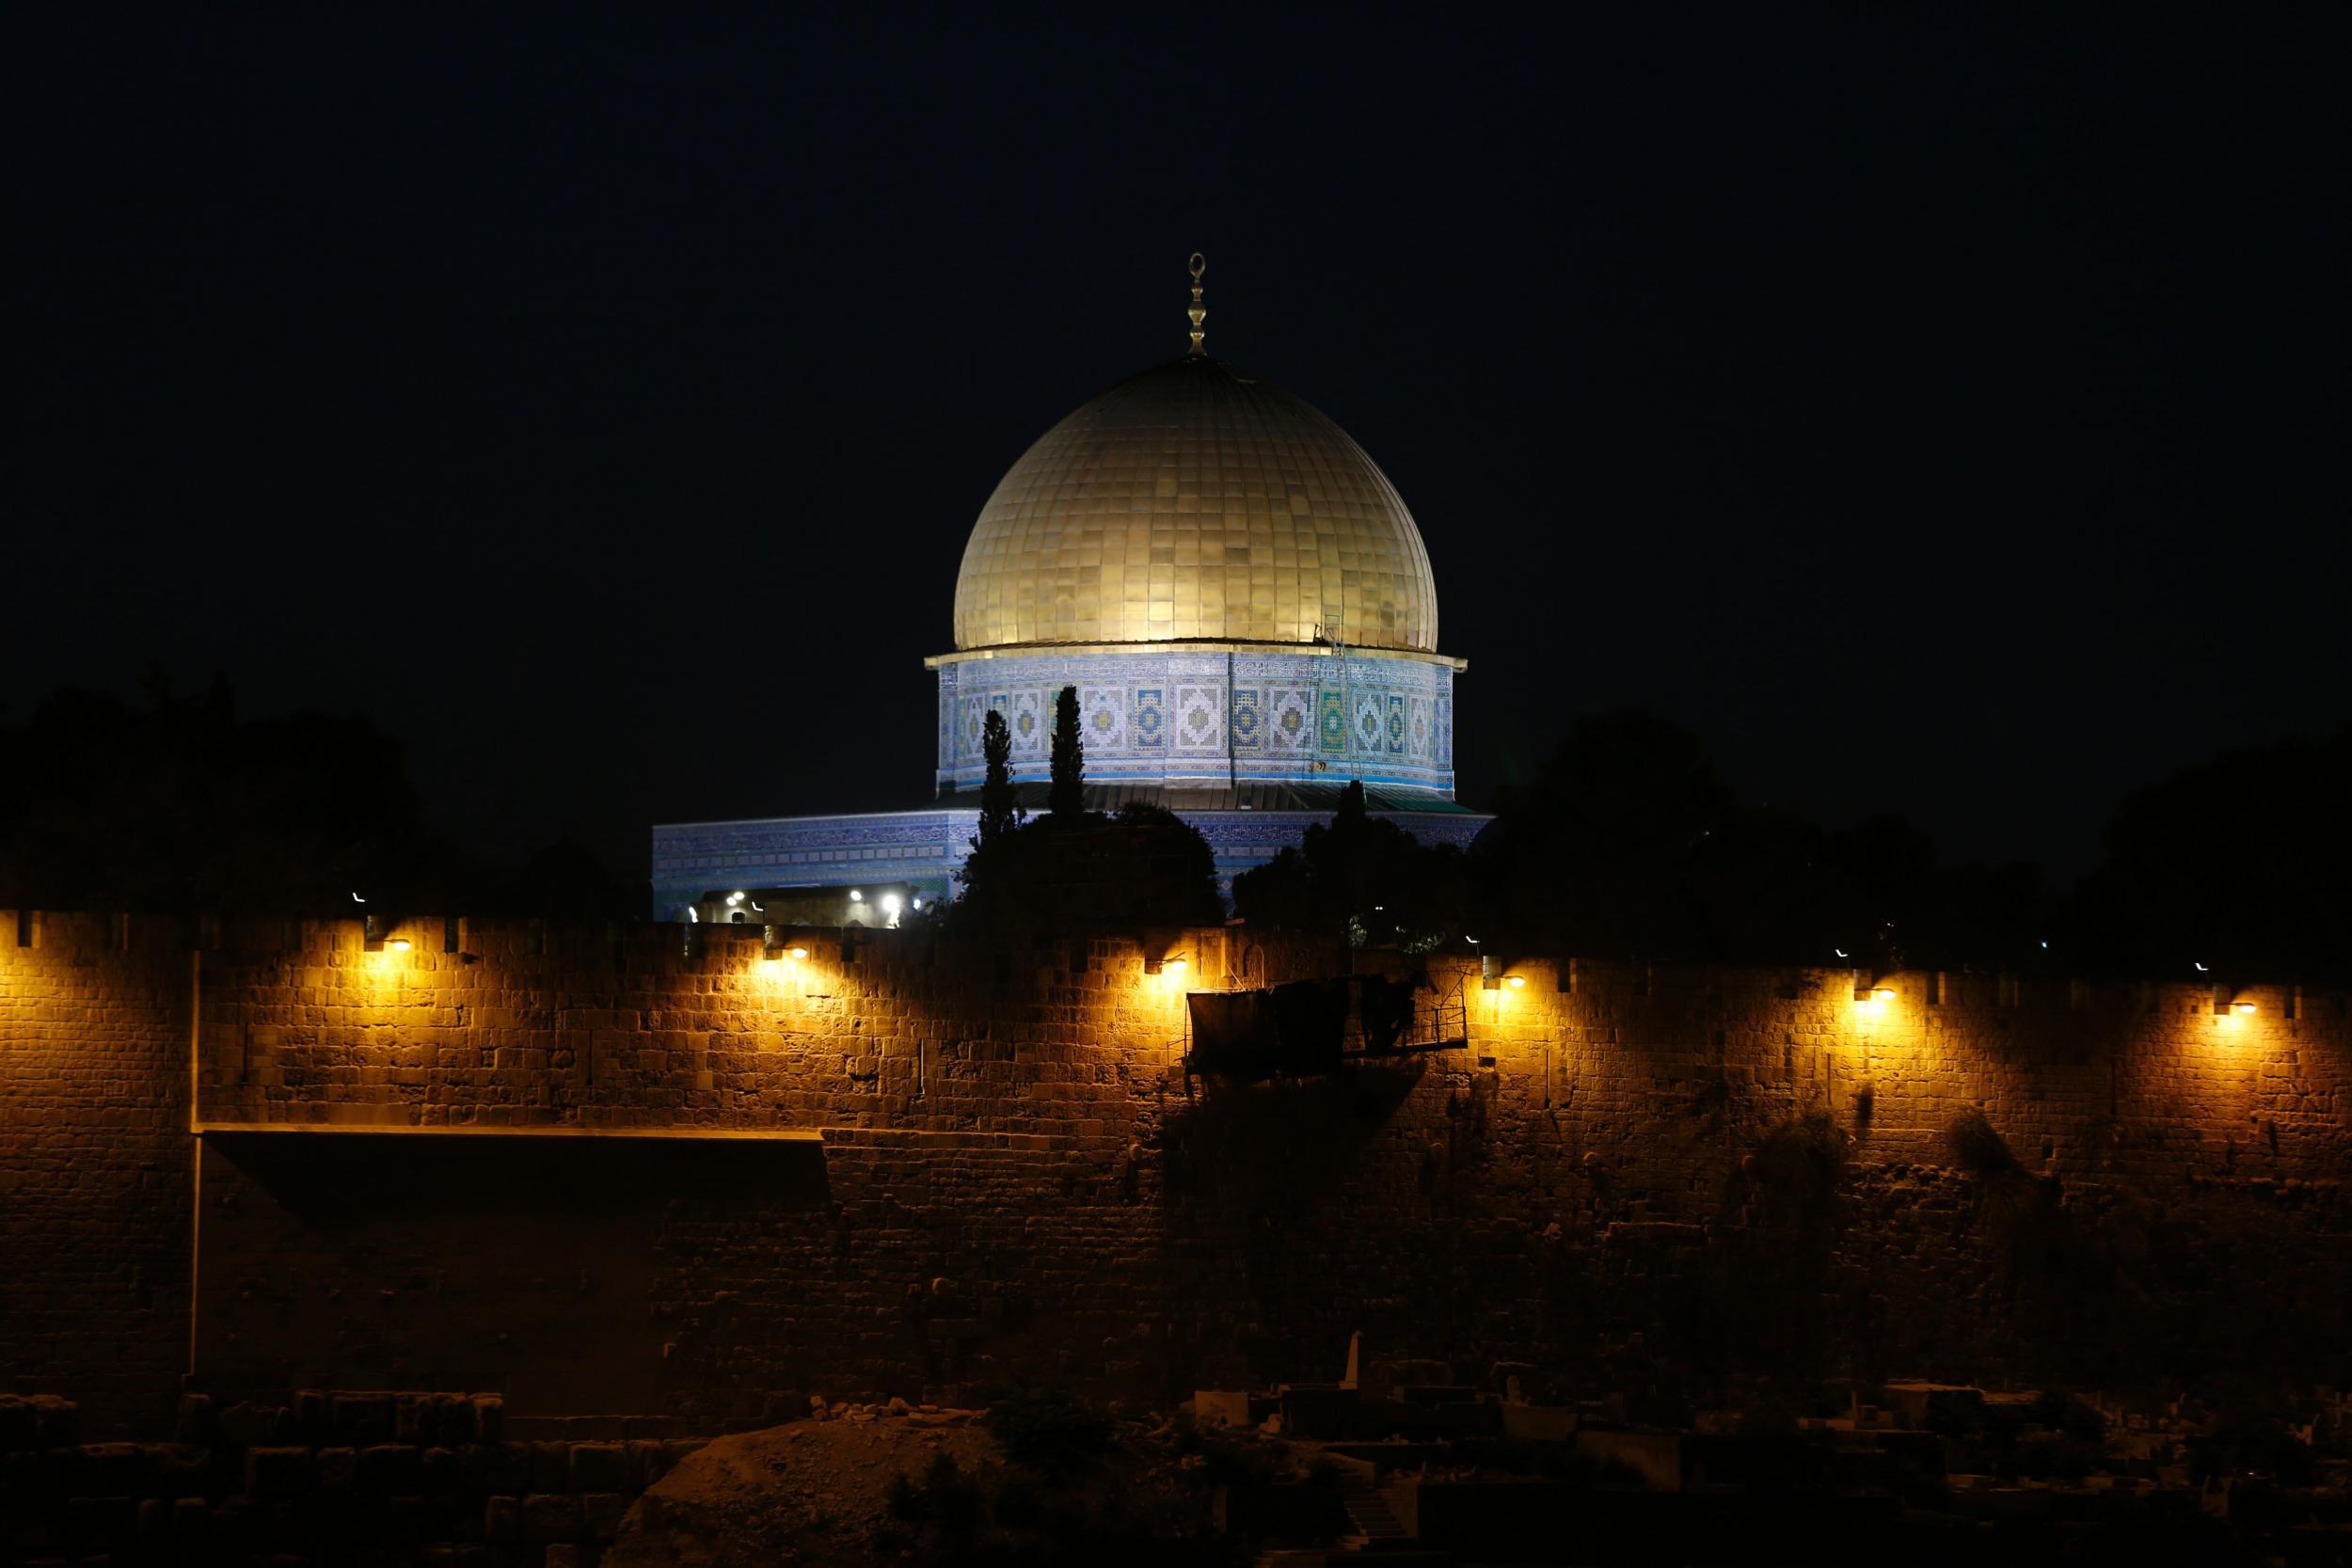 The Dome of Rock at the Al-Aqsa Mosque compound, a UNESCO heritage site, in the Old City of Jerusalem